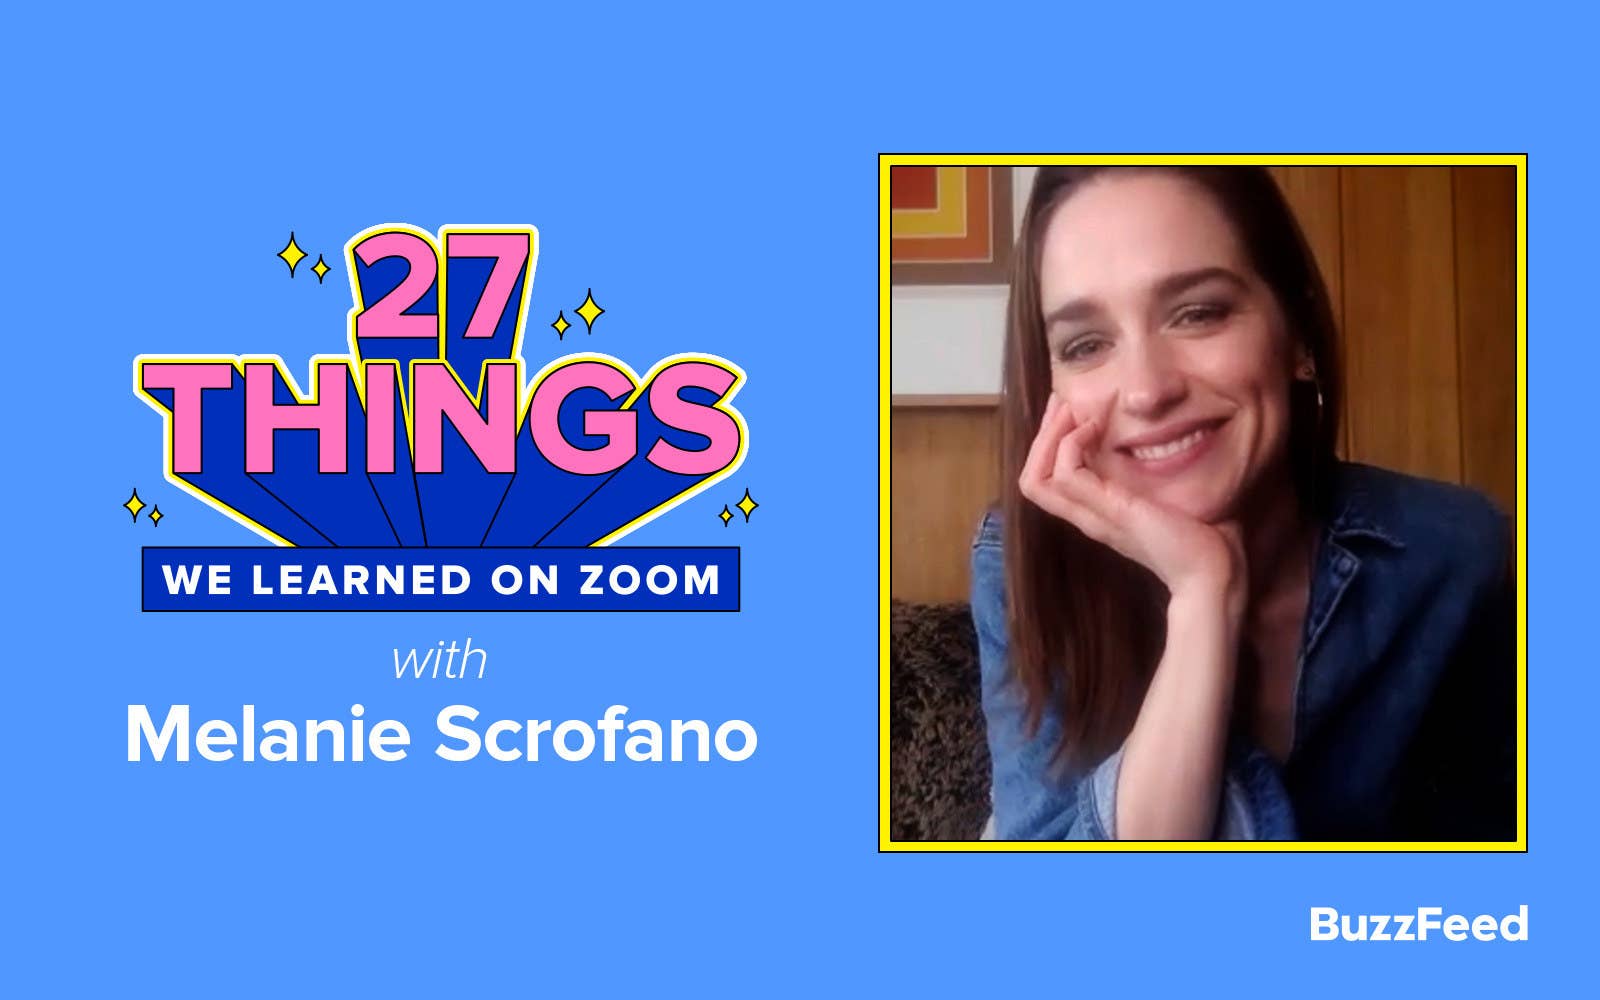 A header reading &quot;27 Things We Learned On Zoom With Melanie Scrofano&quot;